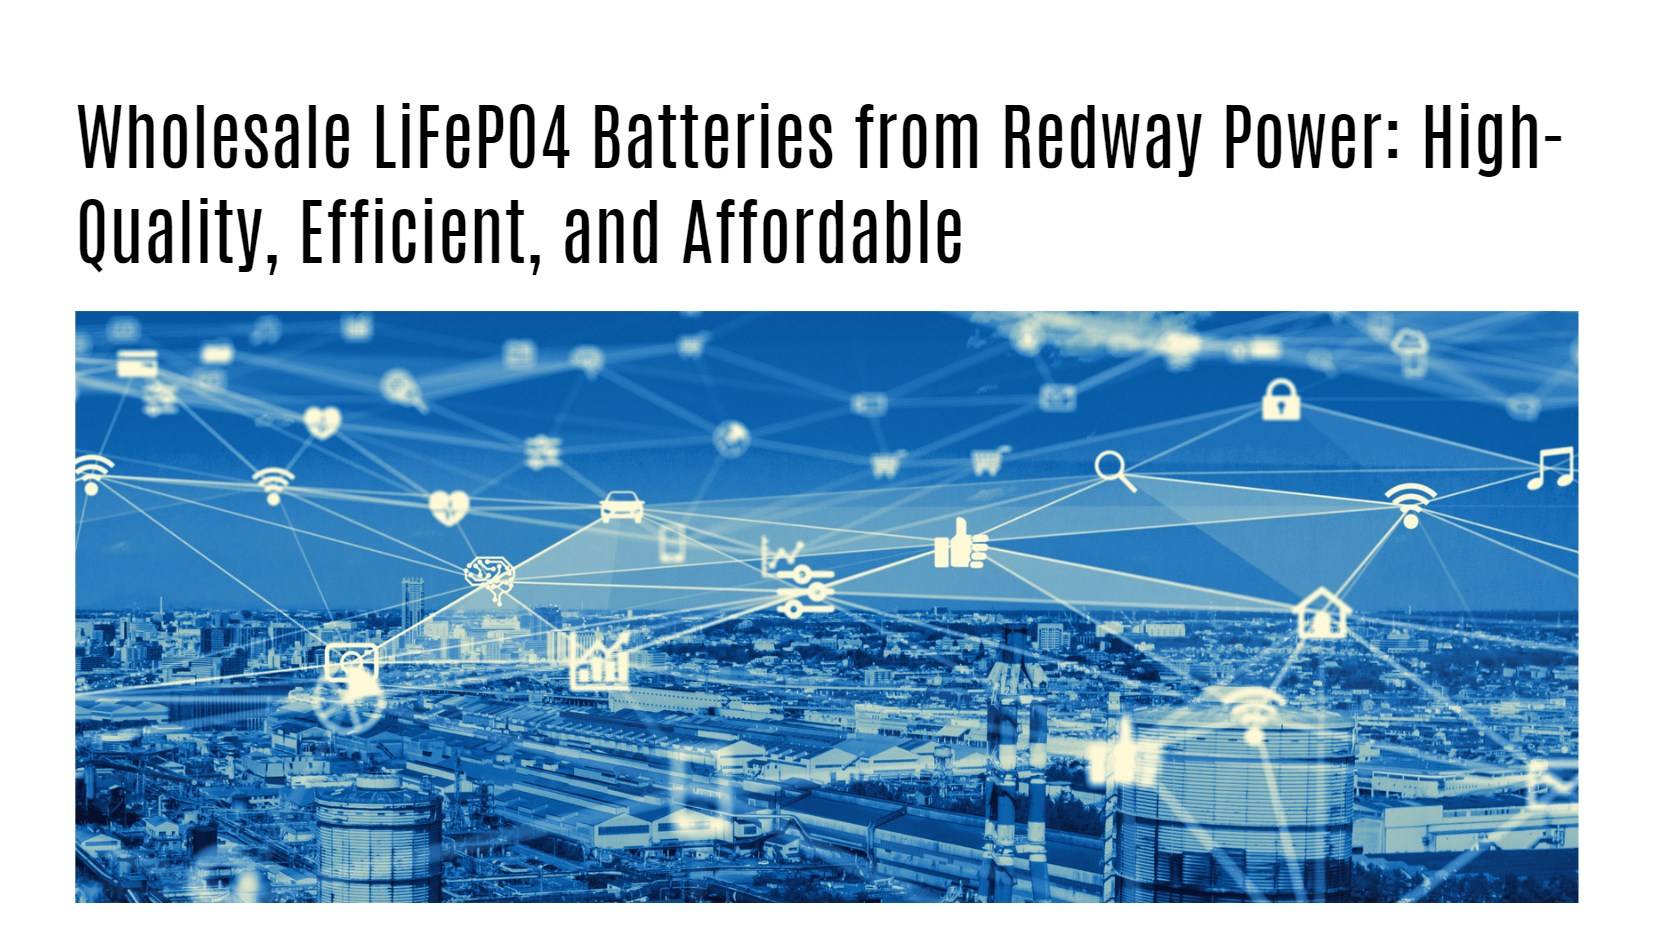 Wholesale LiFePO4 Batteries from Redway Power: High-Quality, Efficient, and Affordable